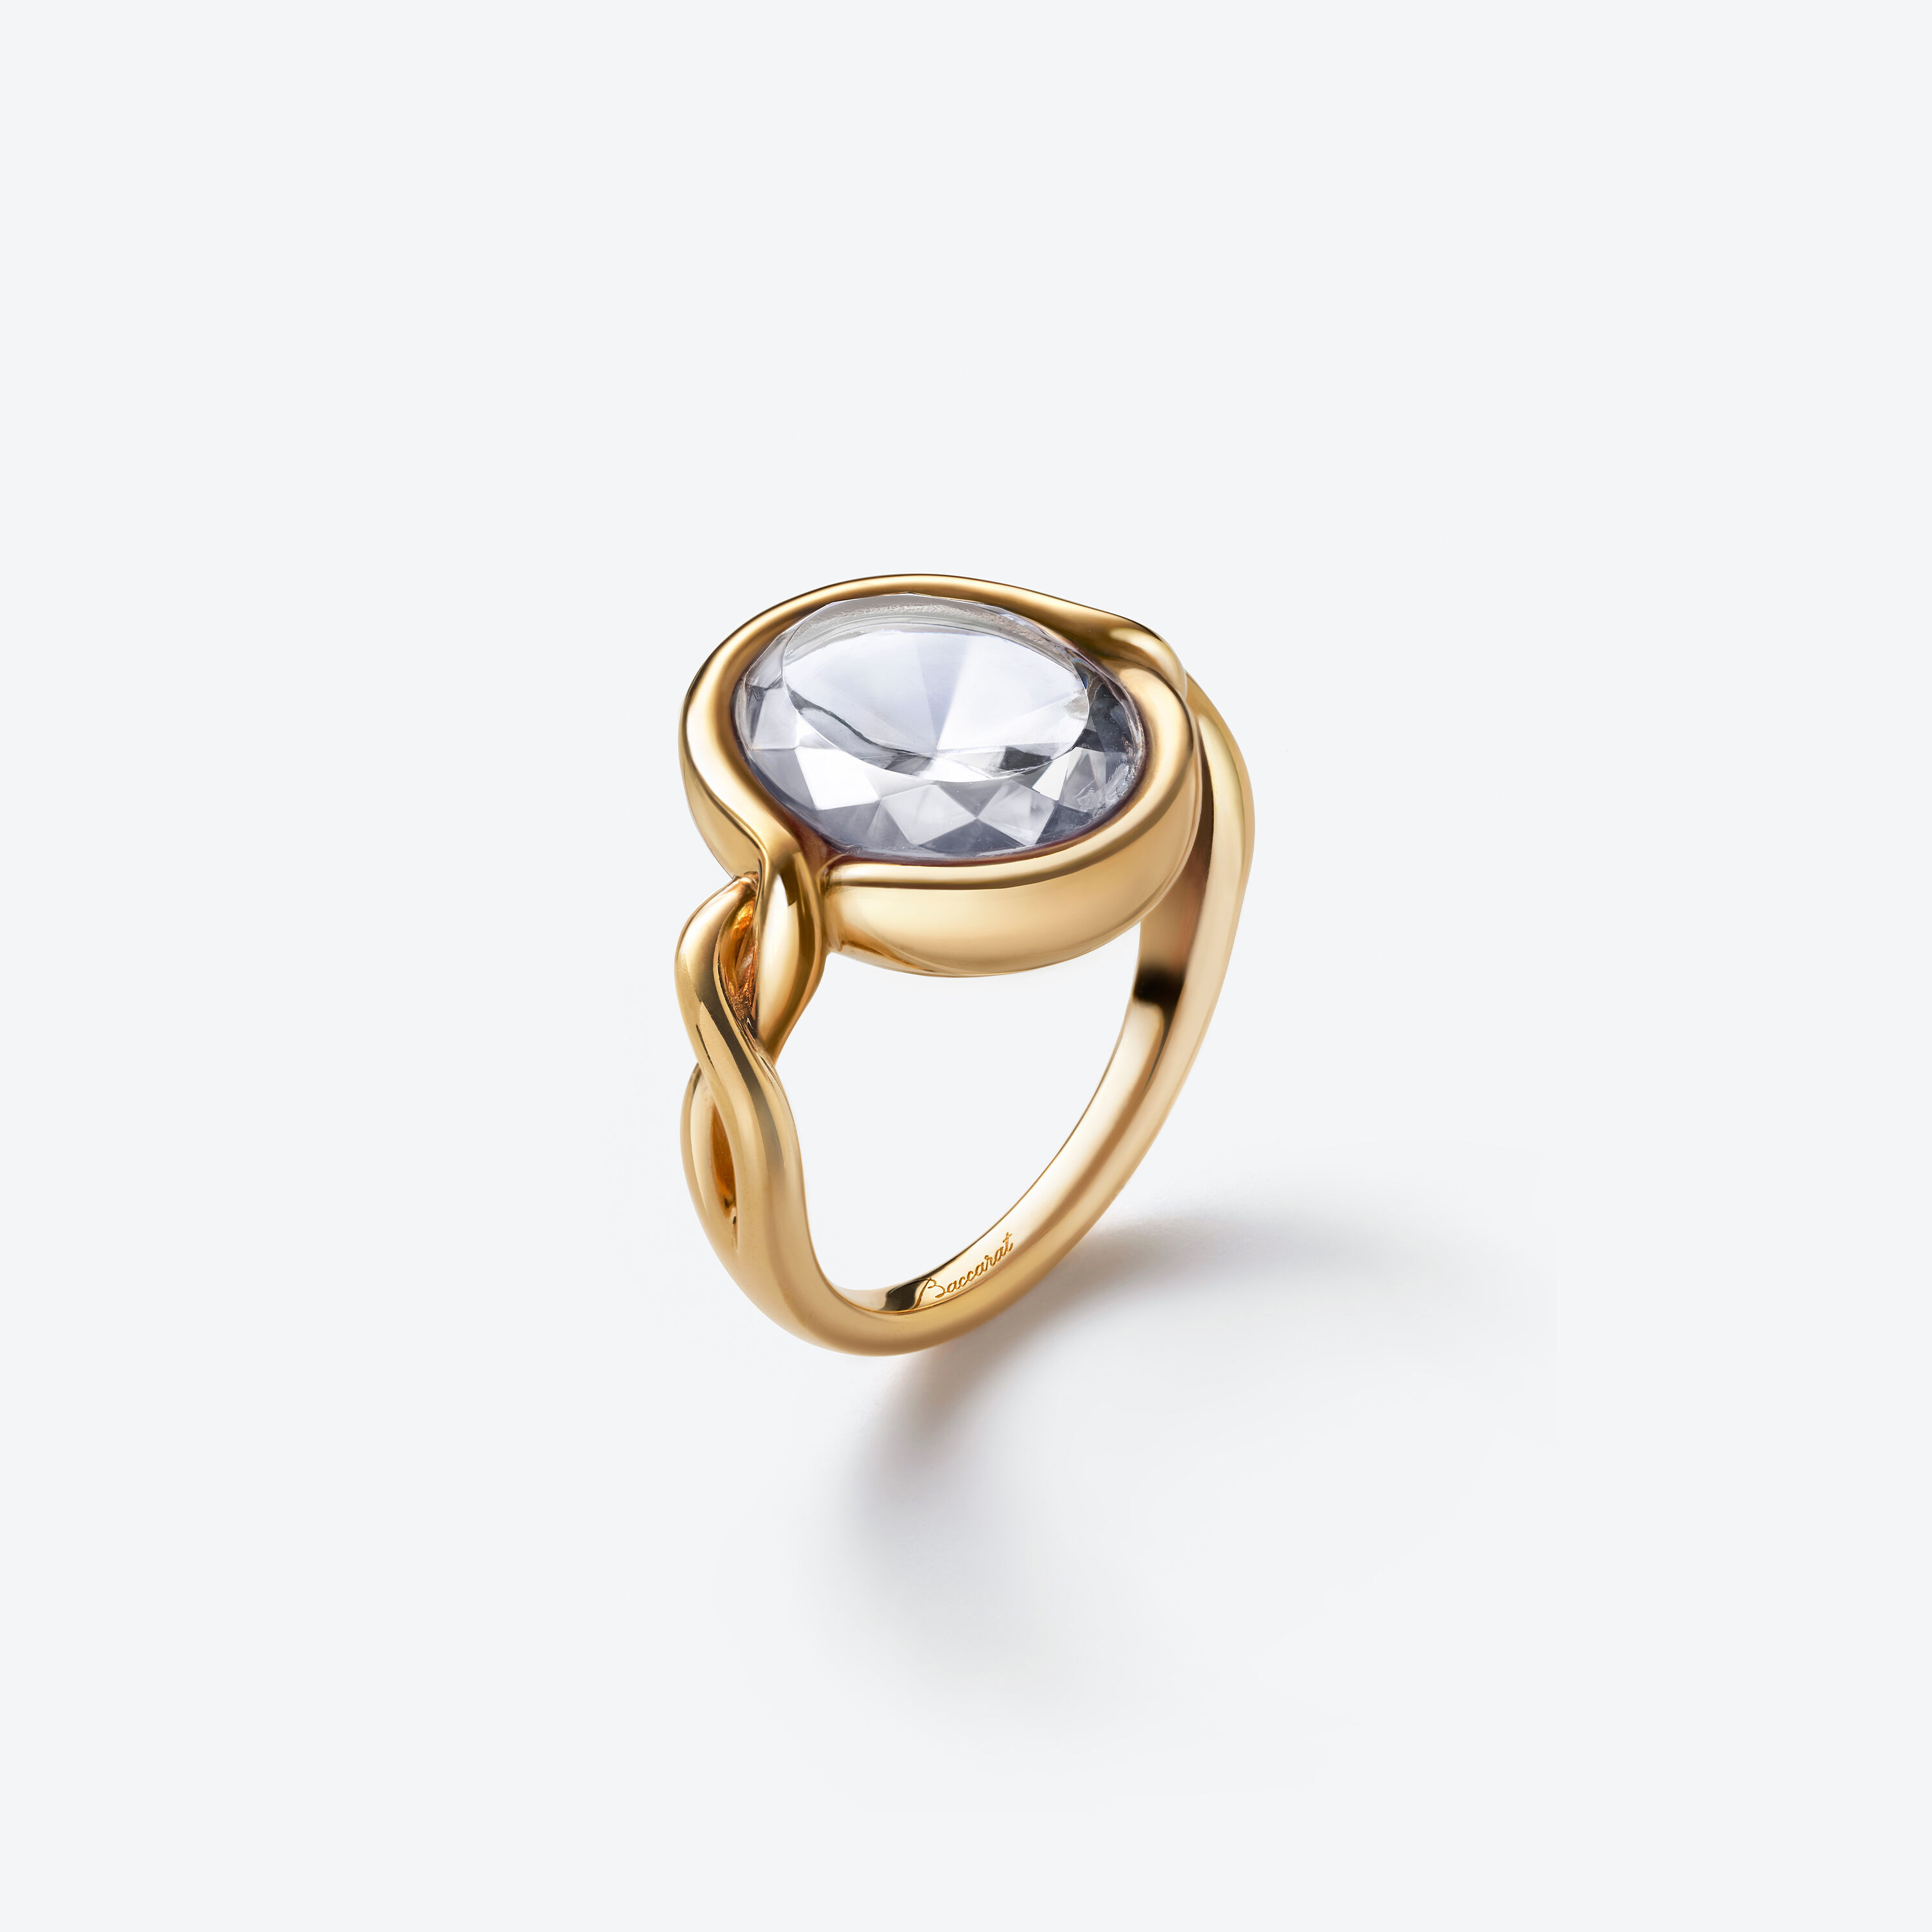 Shop Nur-Un-Nissa Gold Plated Ring by NOYRA at House of Designers – HOUSE  OF DESIGNERS